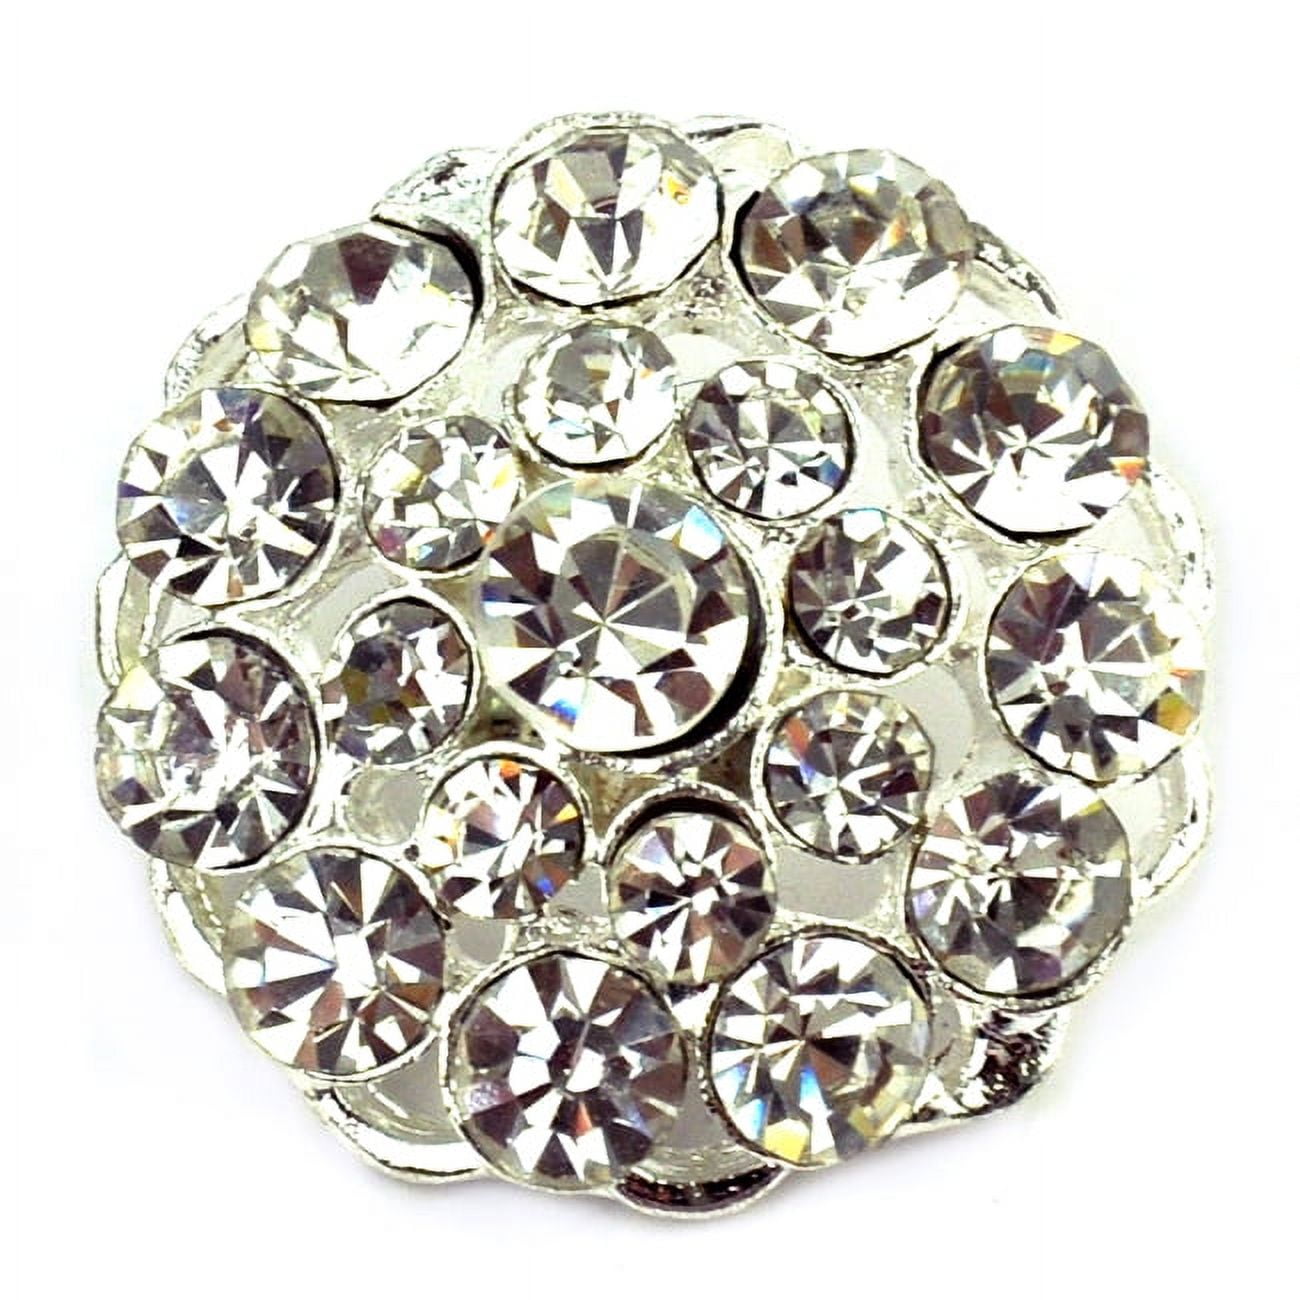 10 pcs,Shank buttons,round buttons,rhinestone pearls,pearl  rhinestones,rhinestone center,flower center,metal rhinestones,pearl  buttons,48